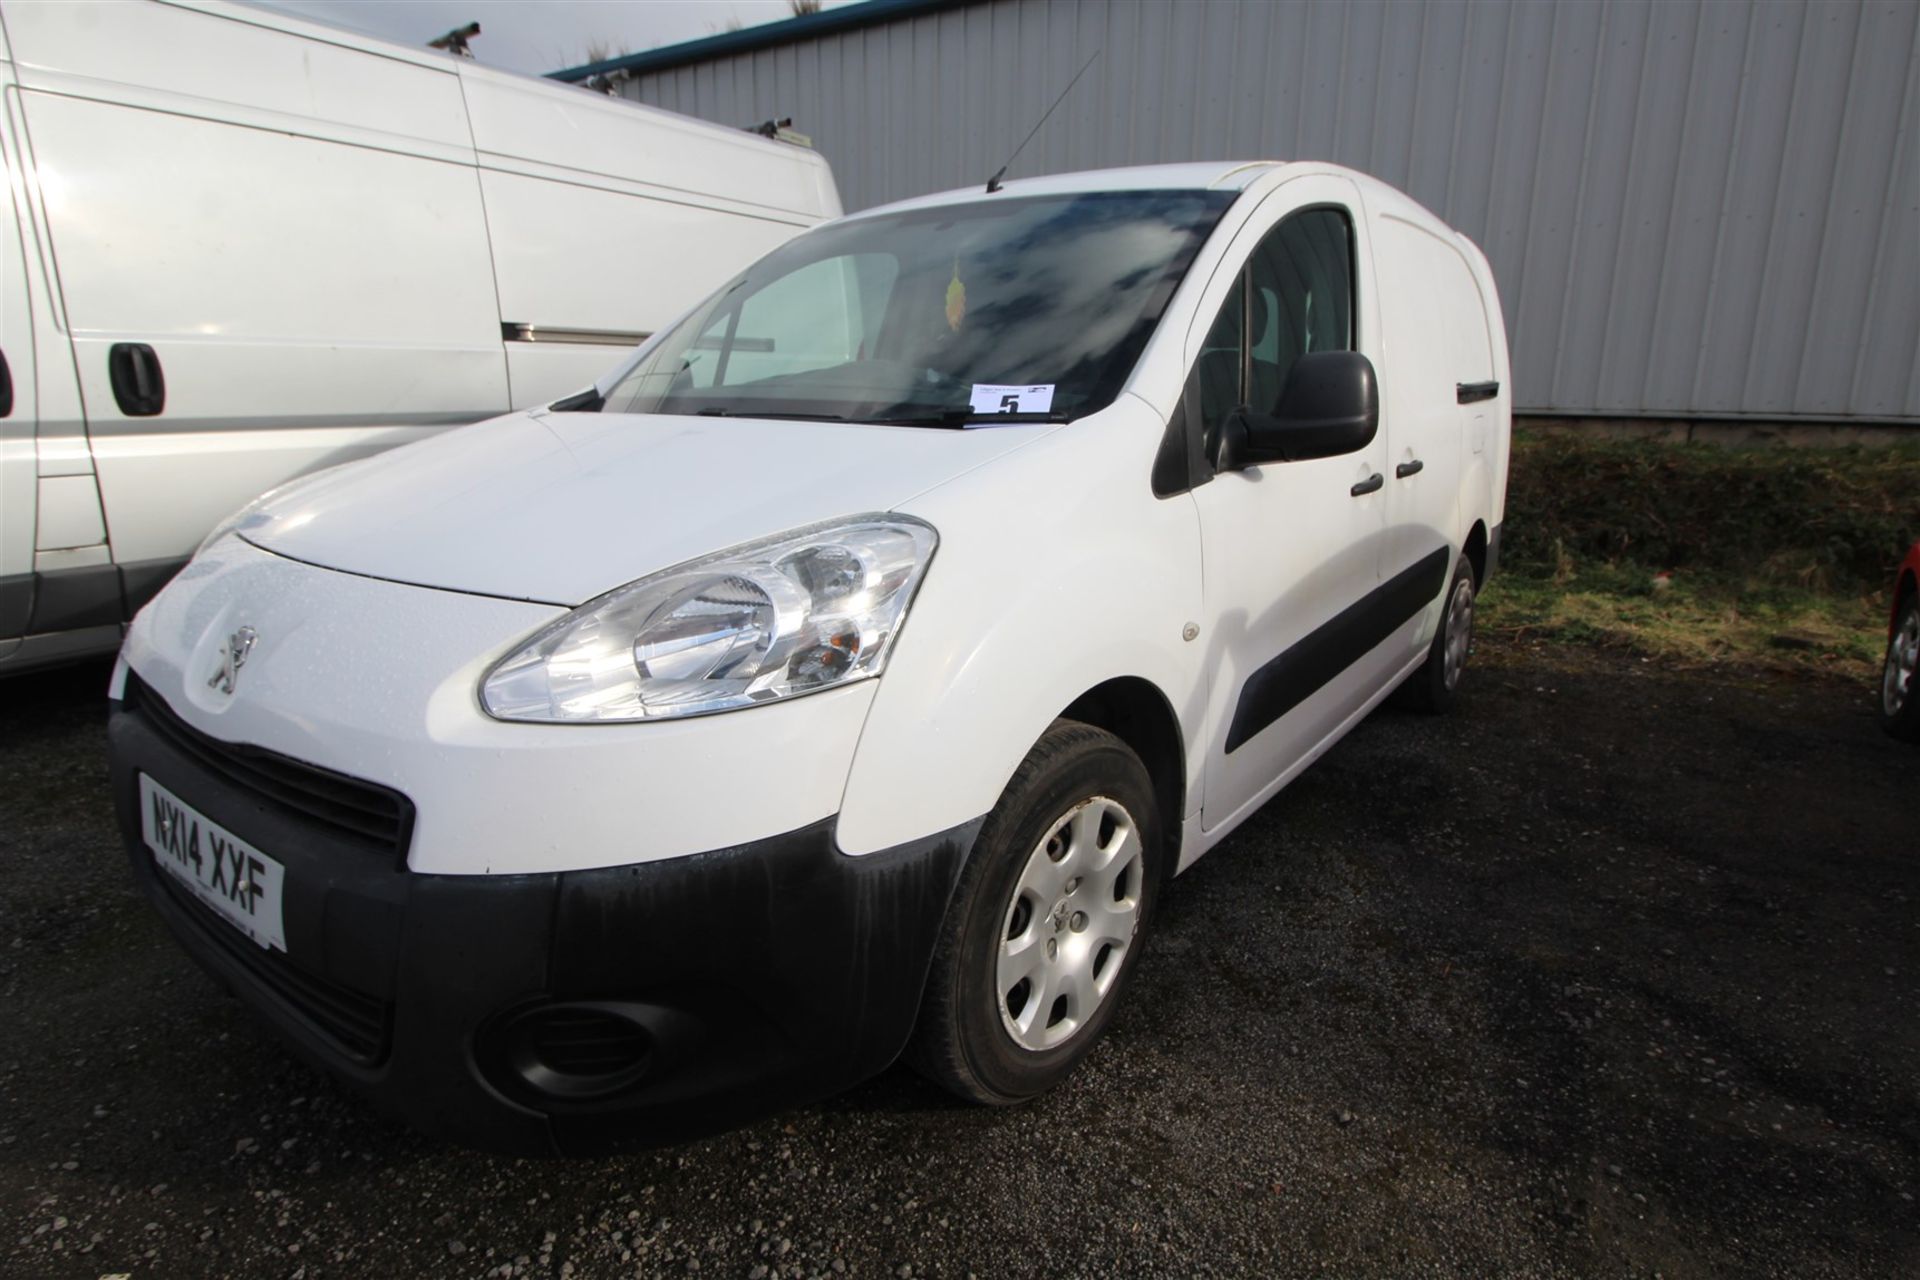 MARCH 2014, PEUGEOT PARTNER CRC HDI VAN, REGISTRATION NO: NX14 XXF, COMPLETE WITH FOLDING REAR